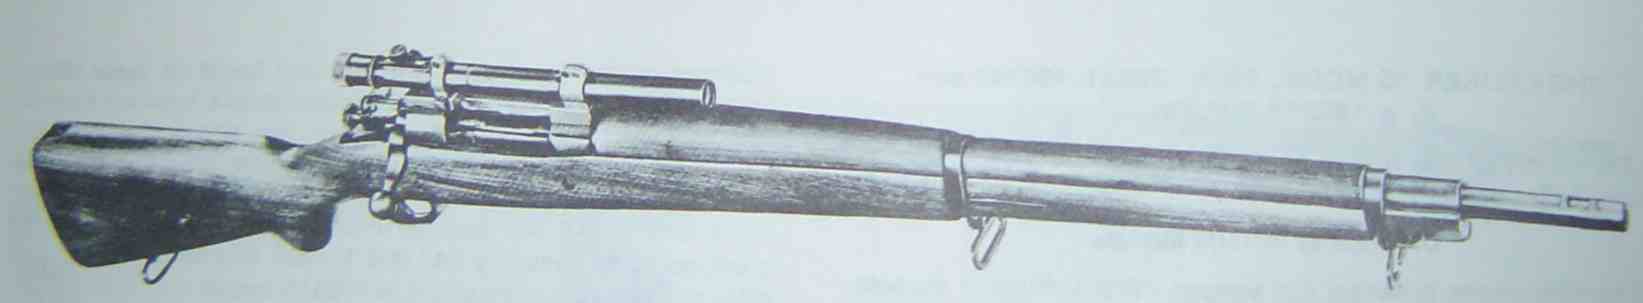 Springfield Mle 1903 A4